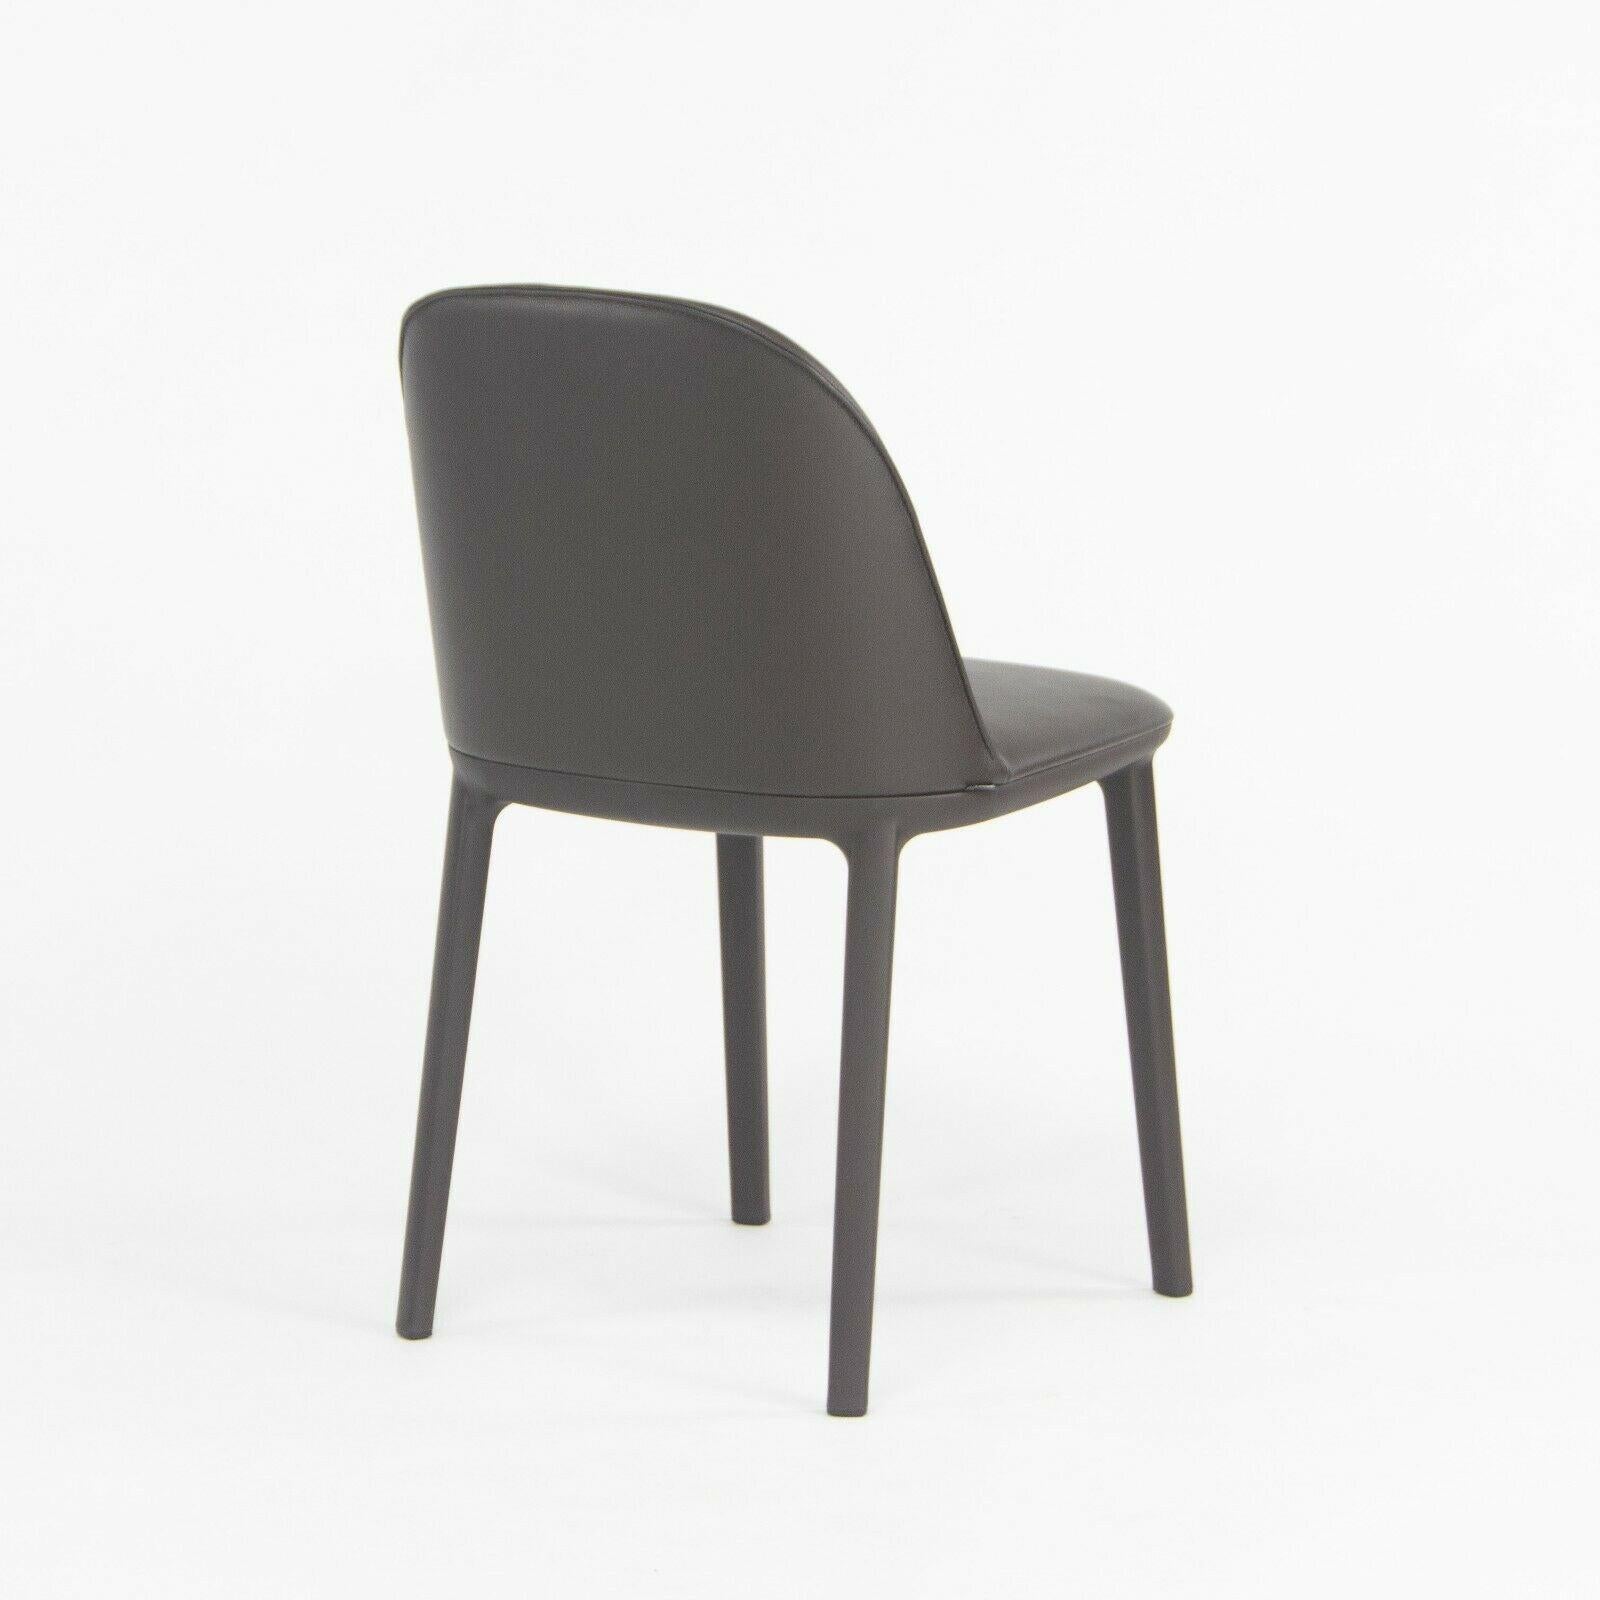 2019 Vitra Softshell Side Chair w Dark Brown Leather by Ronan & Erwan Bouroullec For Sale 1